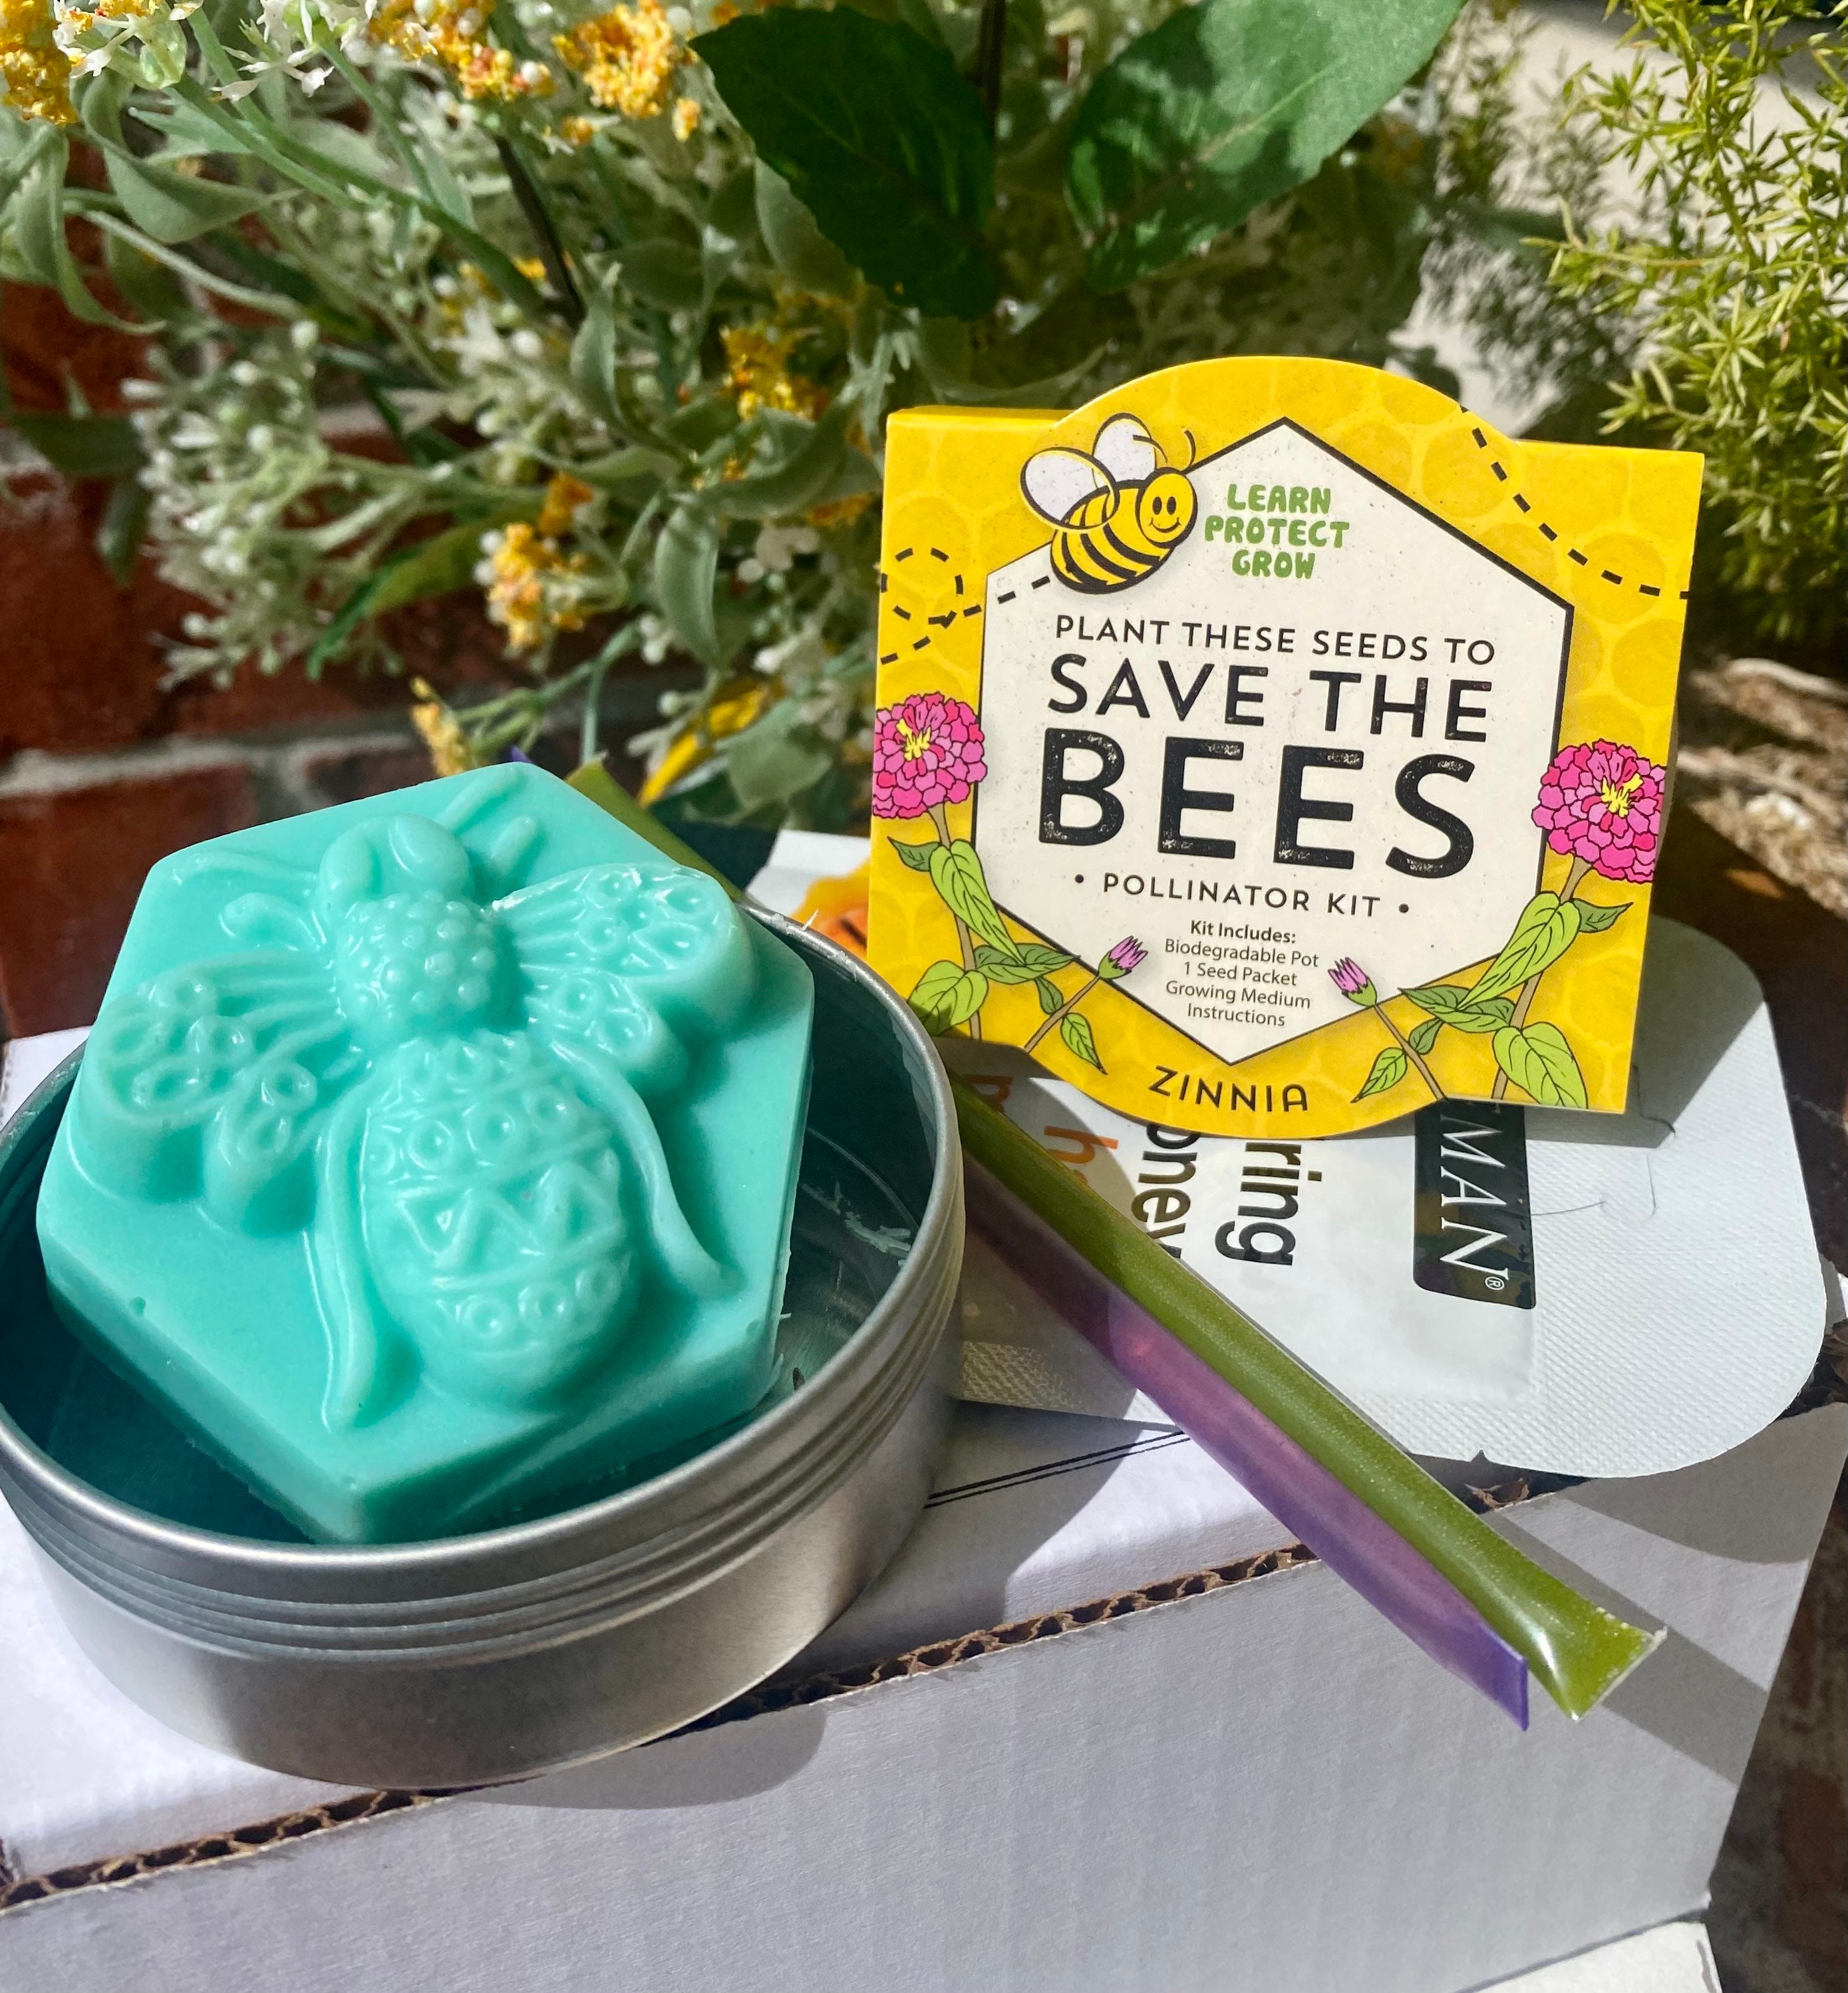 Save the Honeybees Soap Mold For Sale